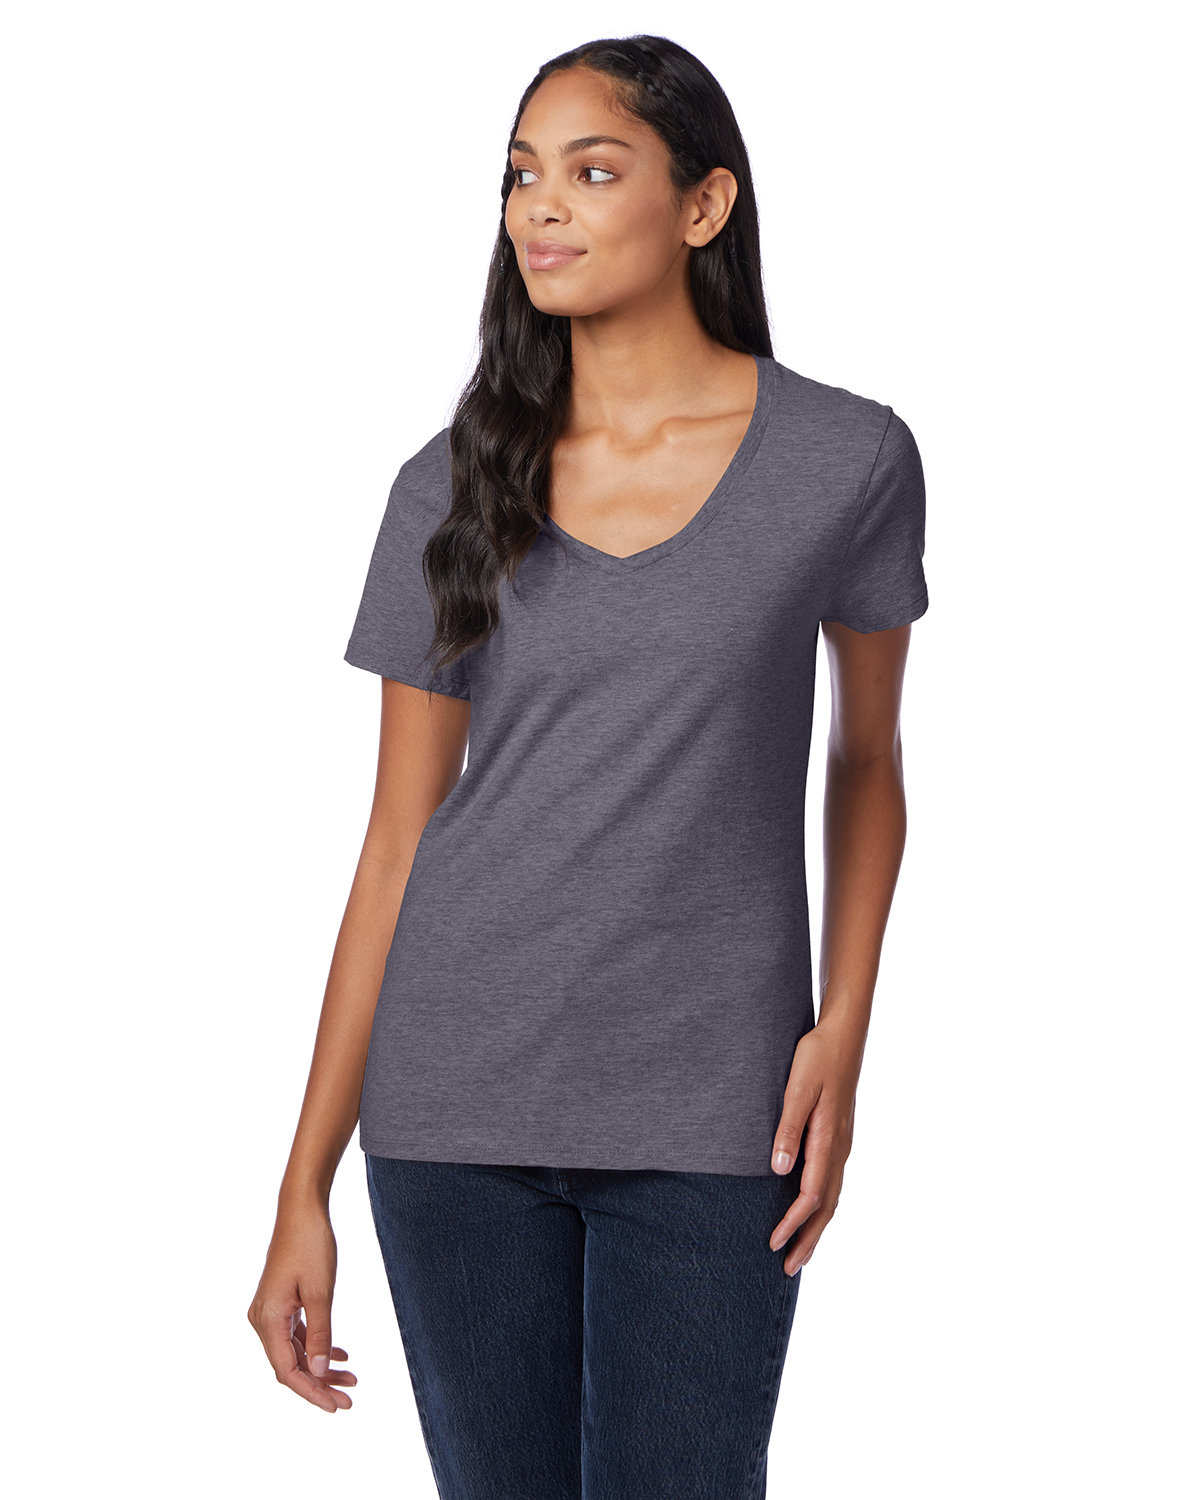 Hanes Ladies' Perfect-T V-Neck T-Shirt charcoal heather 